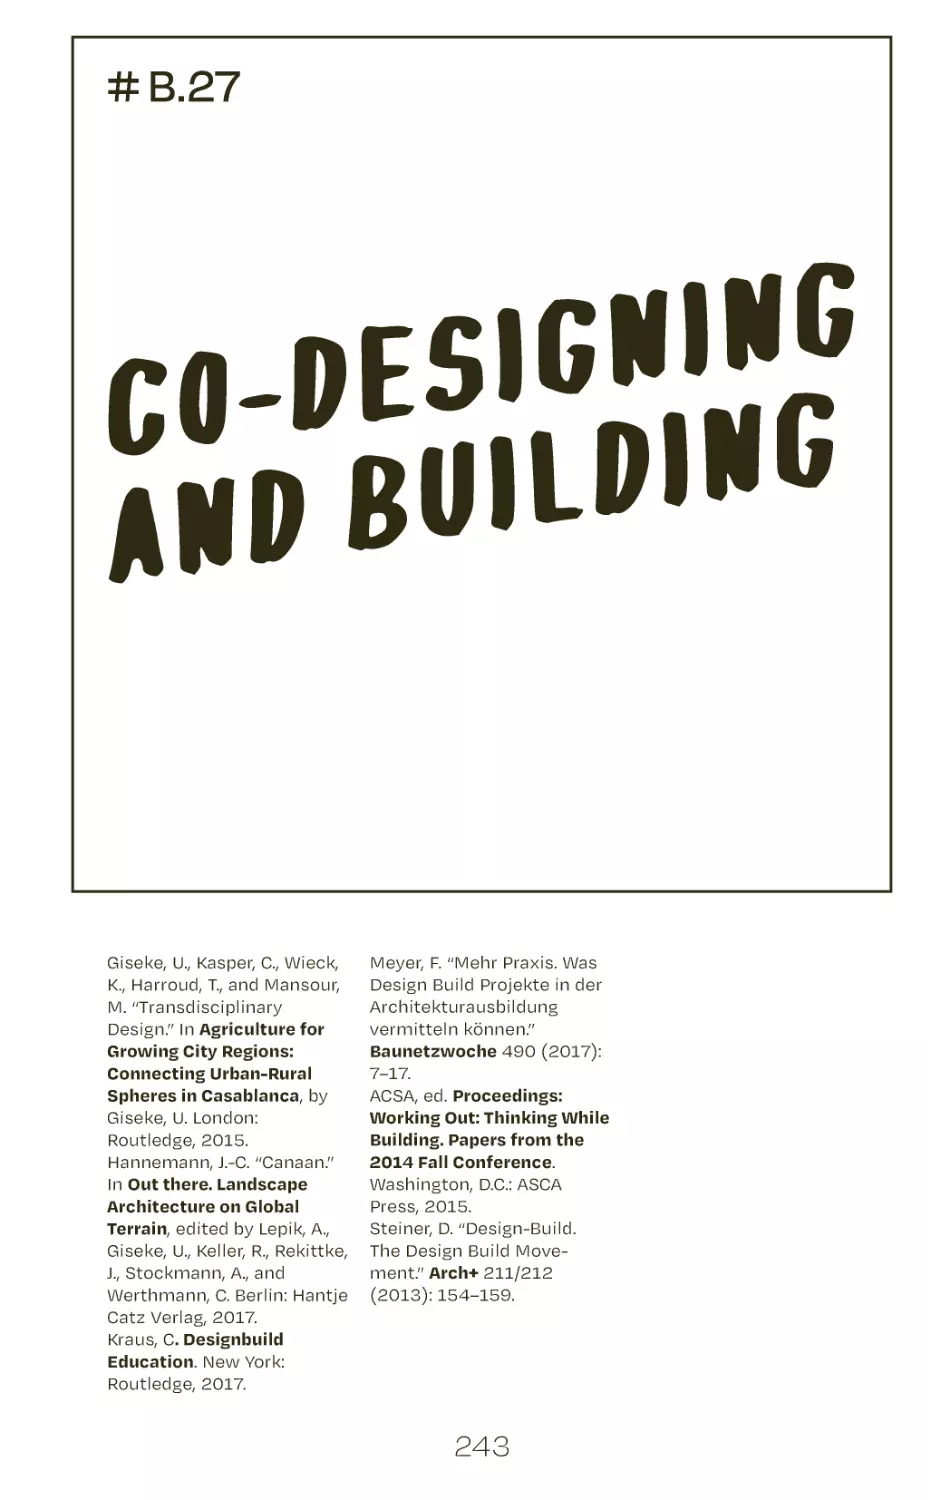 # B.27 co-designing and building